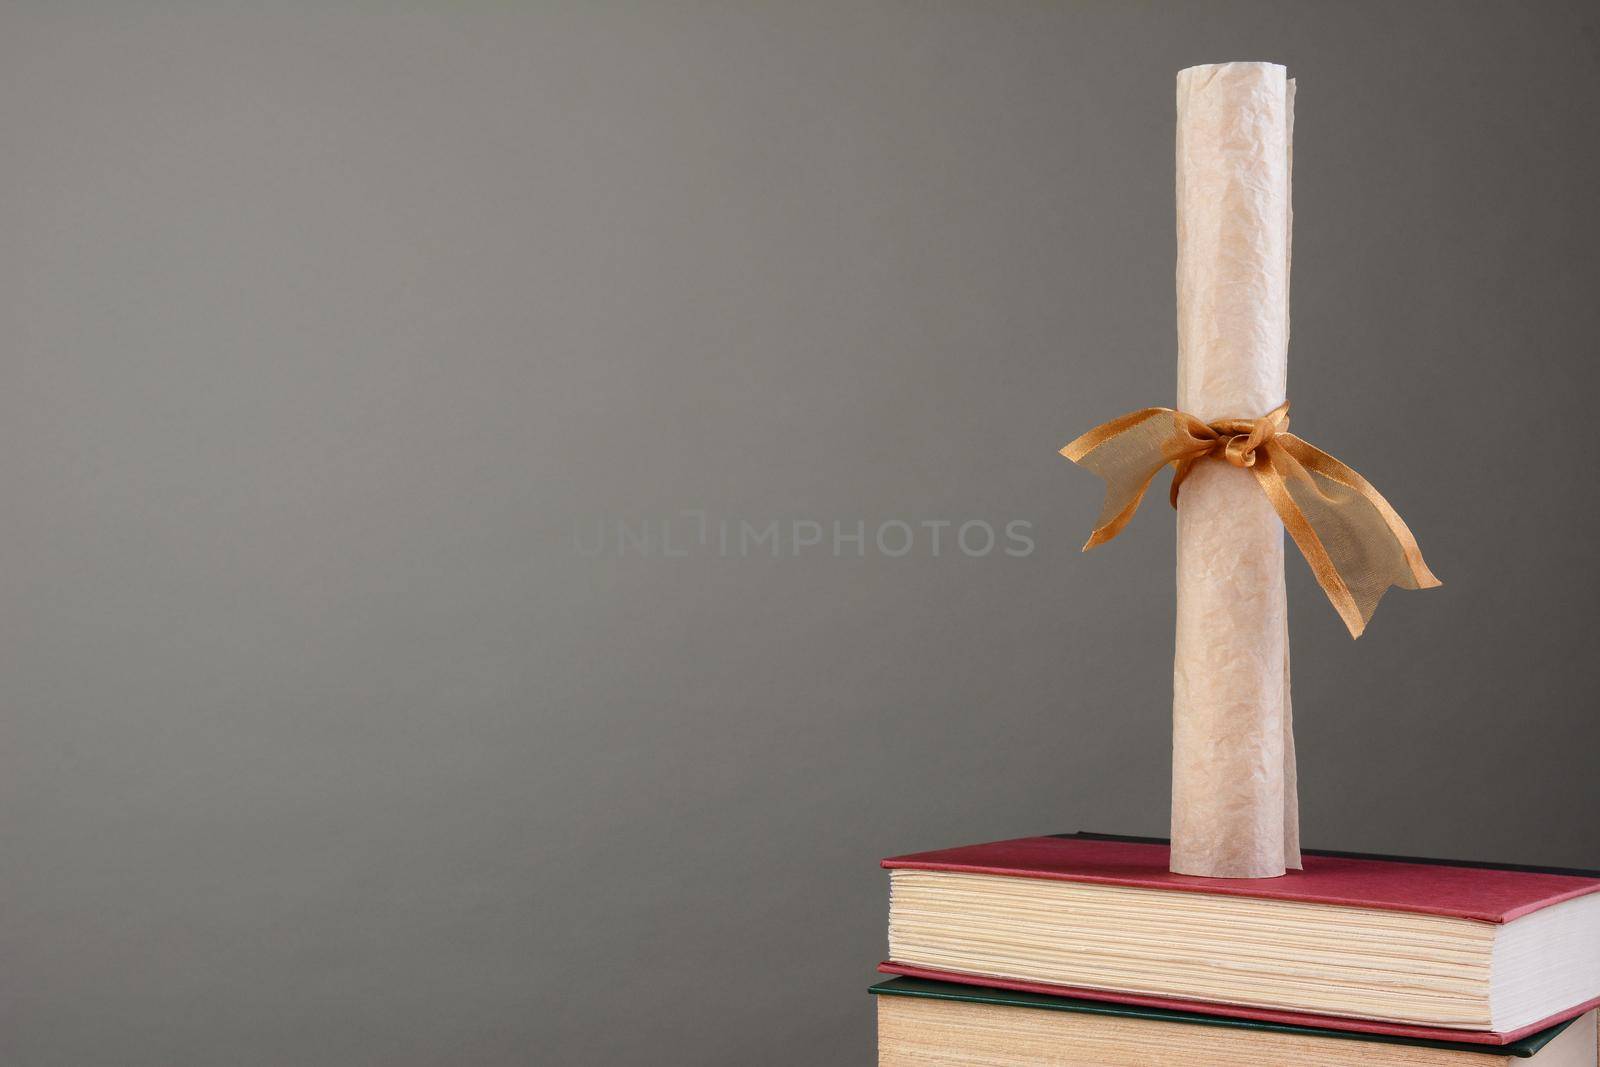 A parchment diploma tied with a gold ribbon standing on a stack of school books against a light to dark gray background. Horizontal format with copy space.